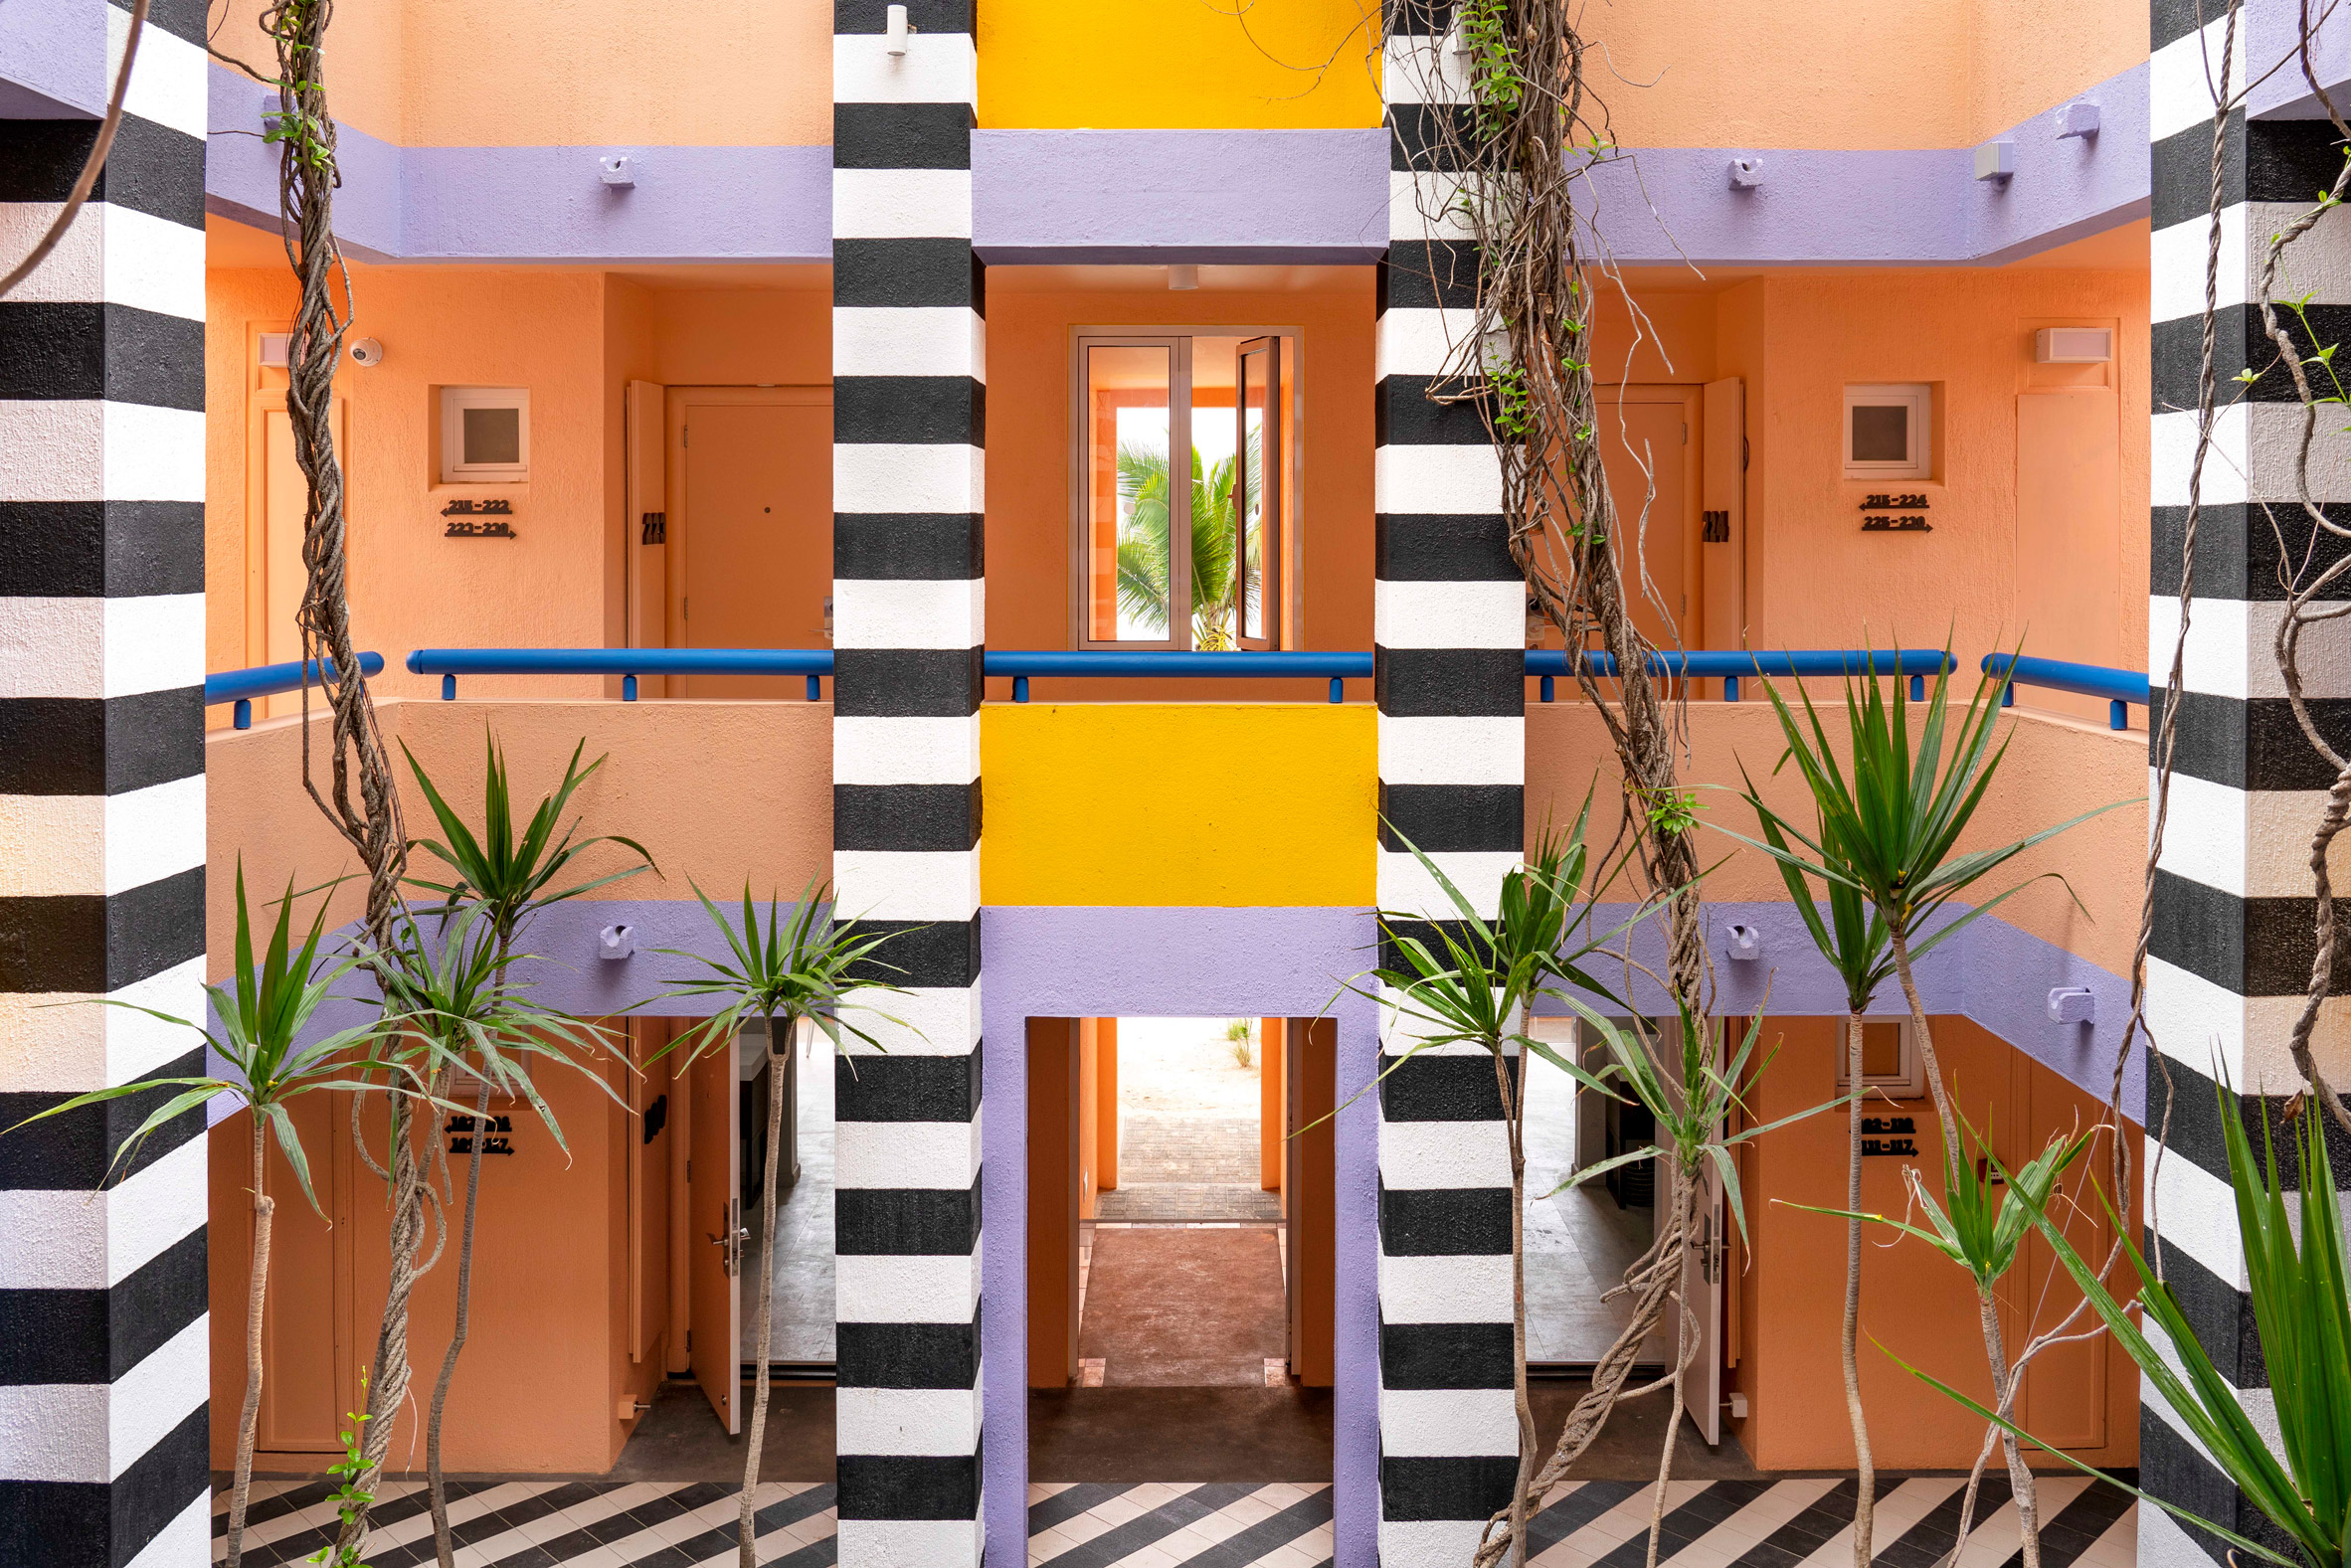 Camille Walala applies vibrant colours and graphics to Salt of Palmar hotel in Mauritius